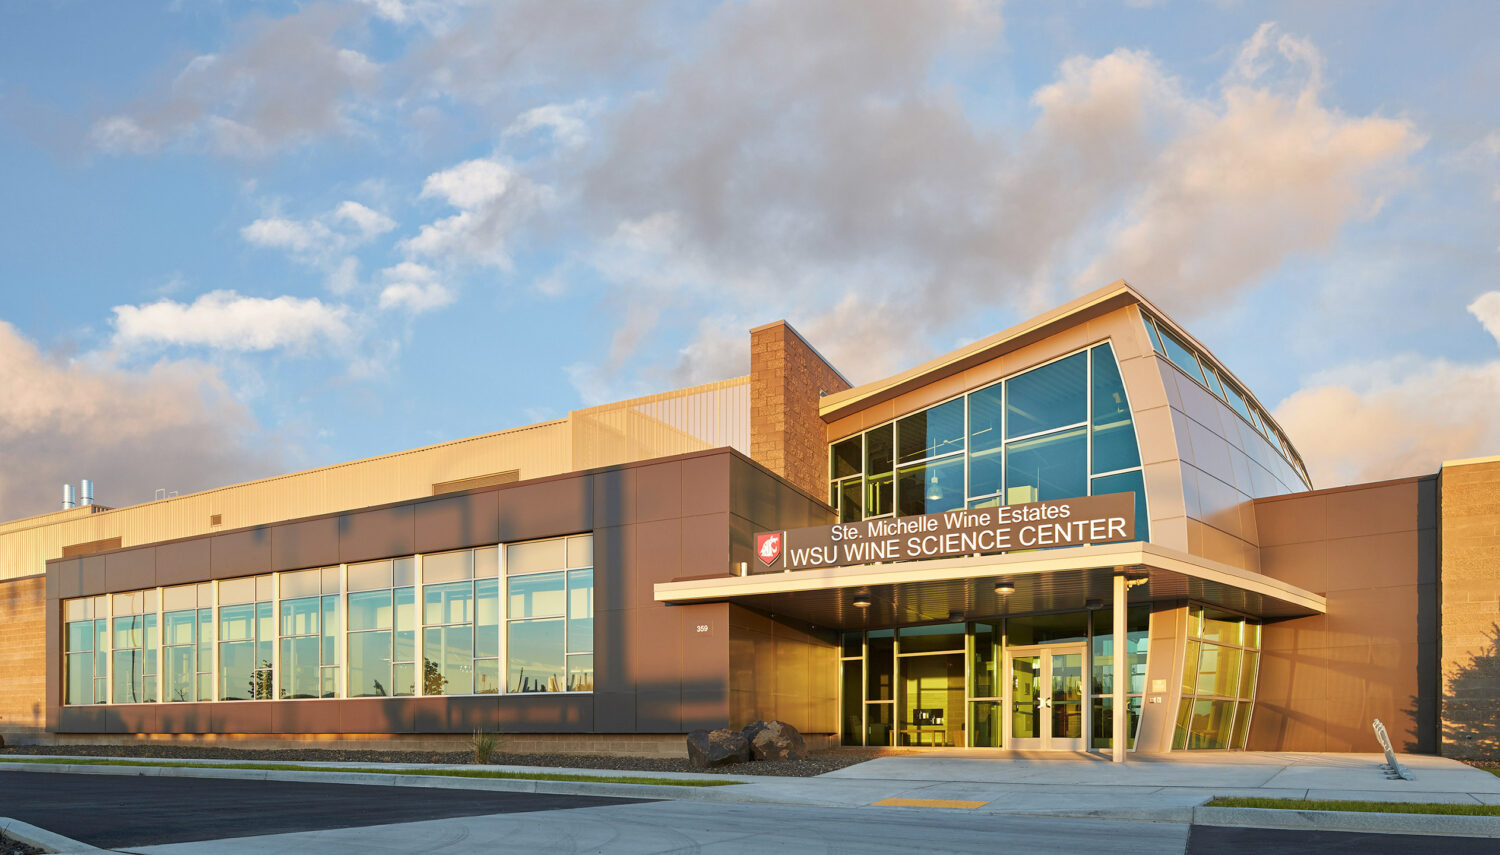 A large brown and tan academic building with a sign above the door that reads "Ste. Michelle Wine Estates WSU Wine Science Center" under a blue sky with wispy grey clouds.